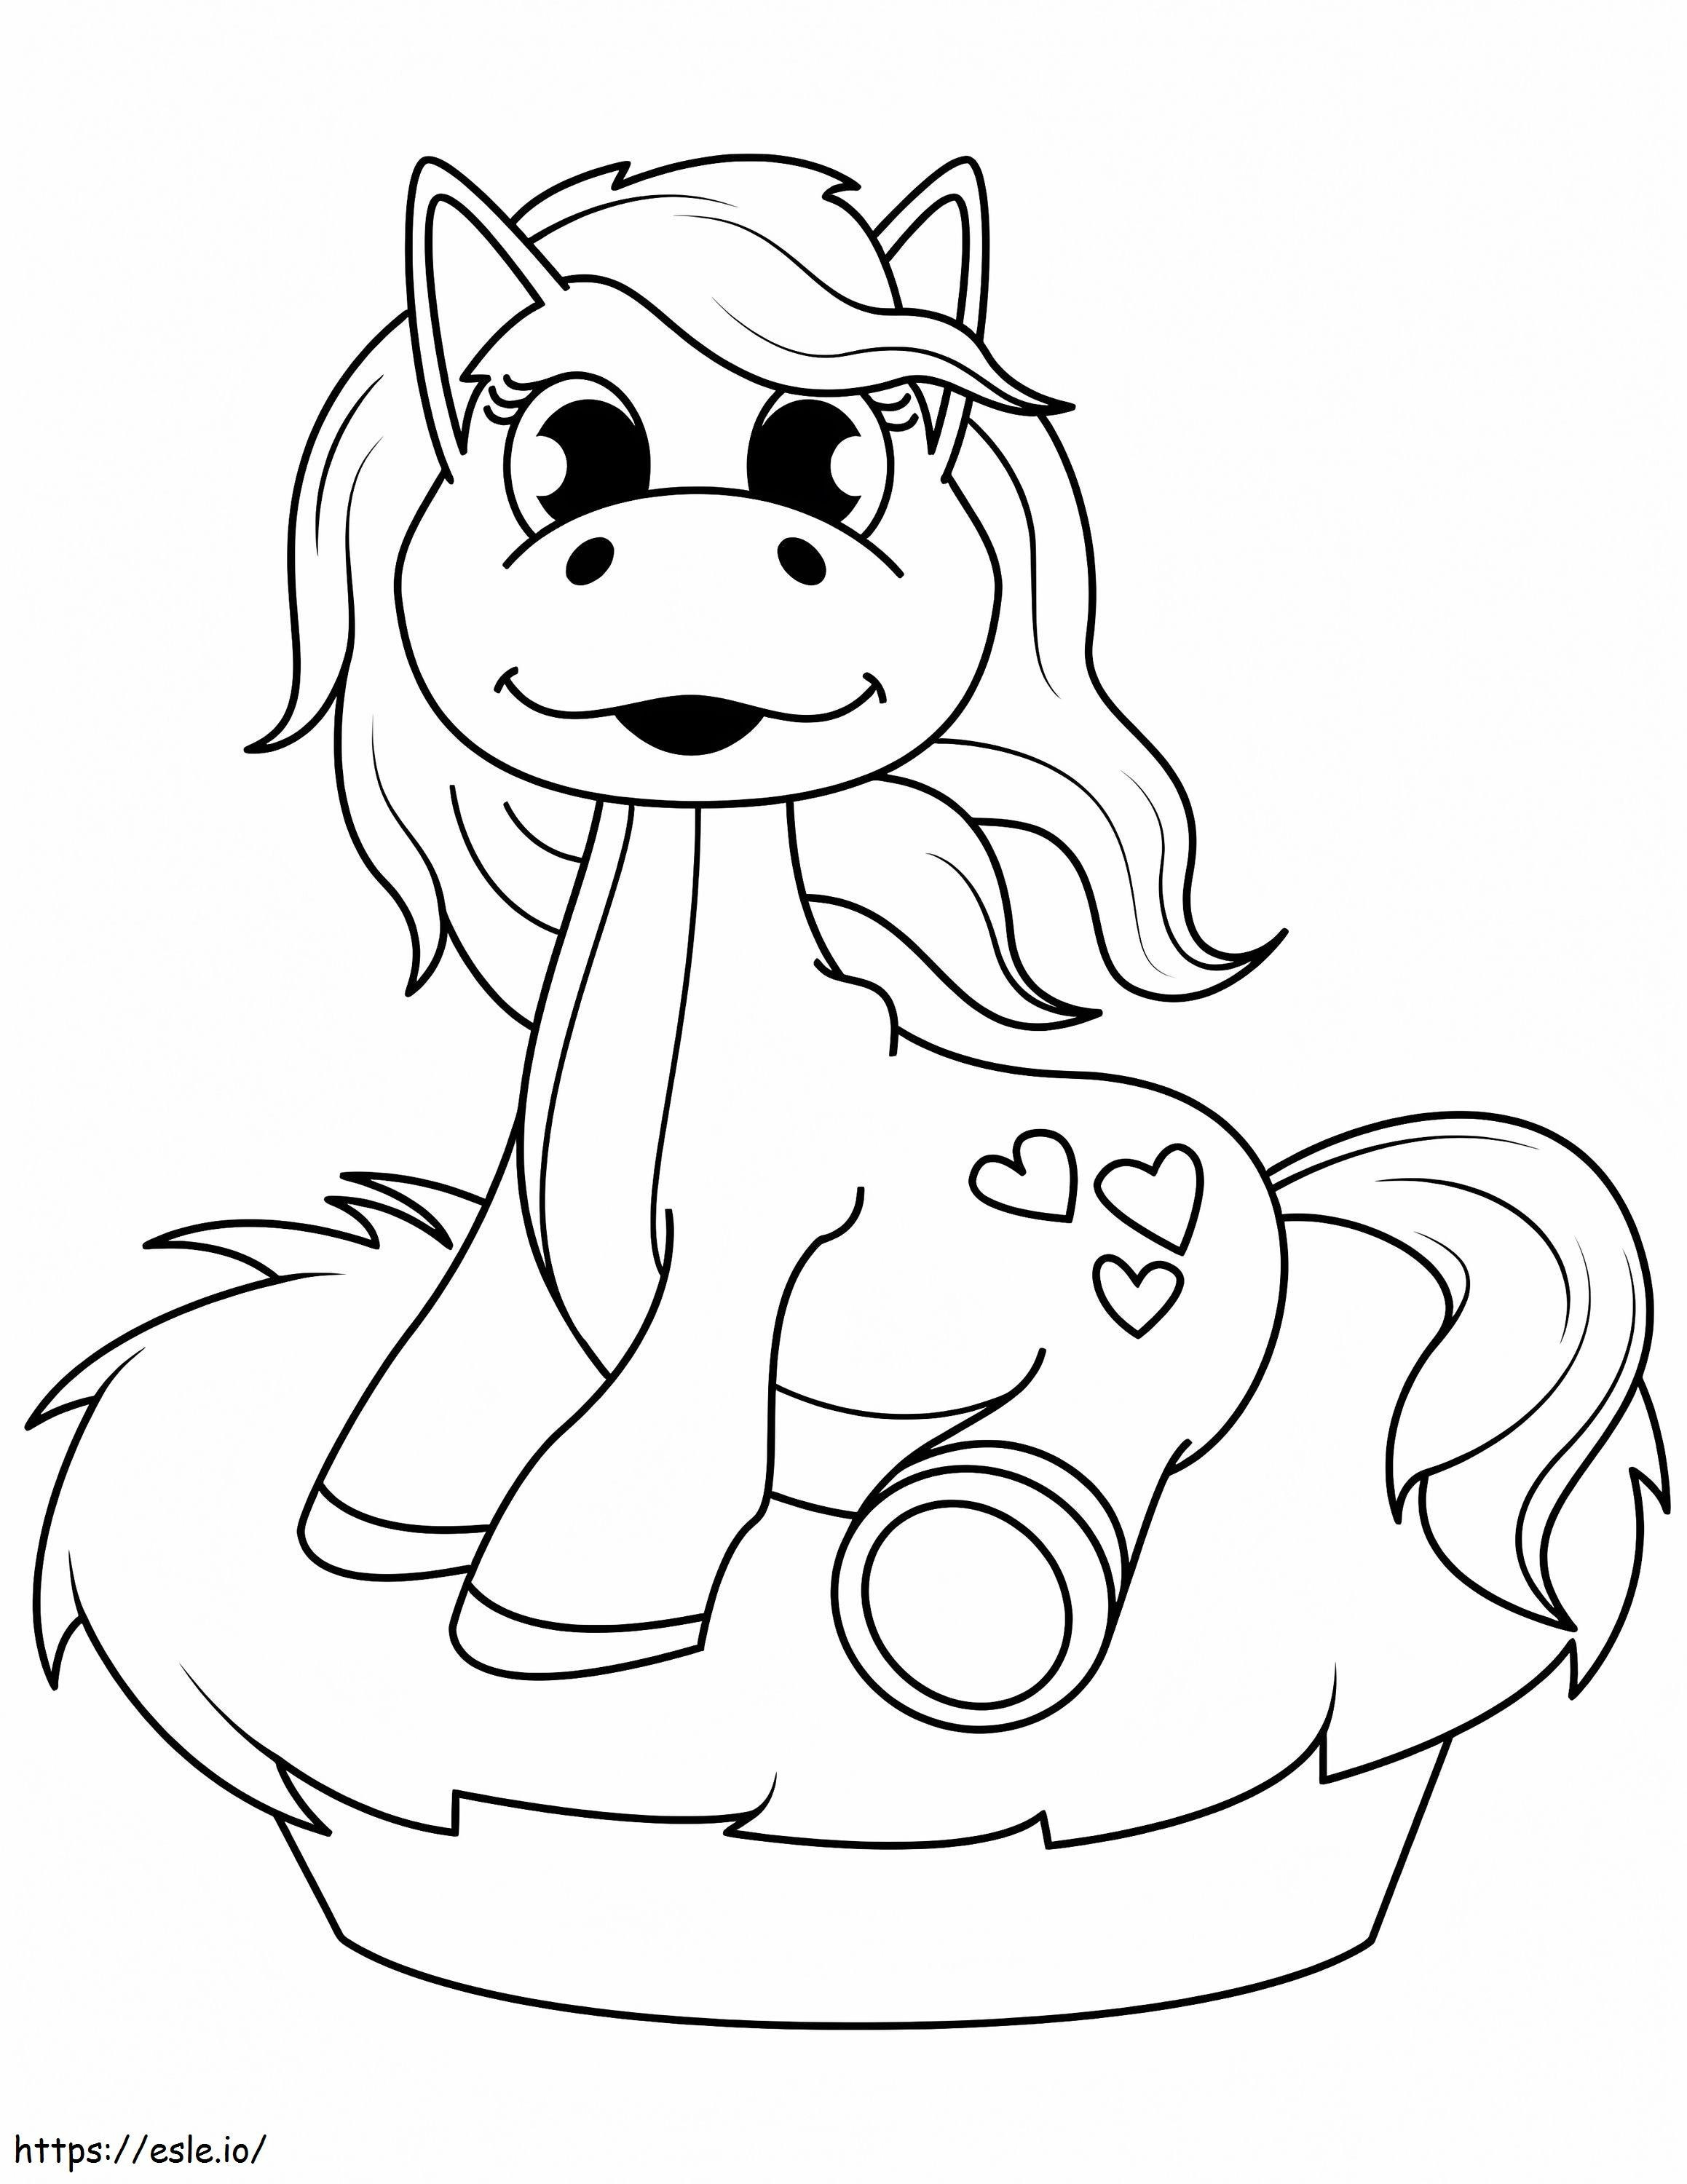 Printable Lovely Horse coloring page